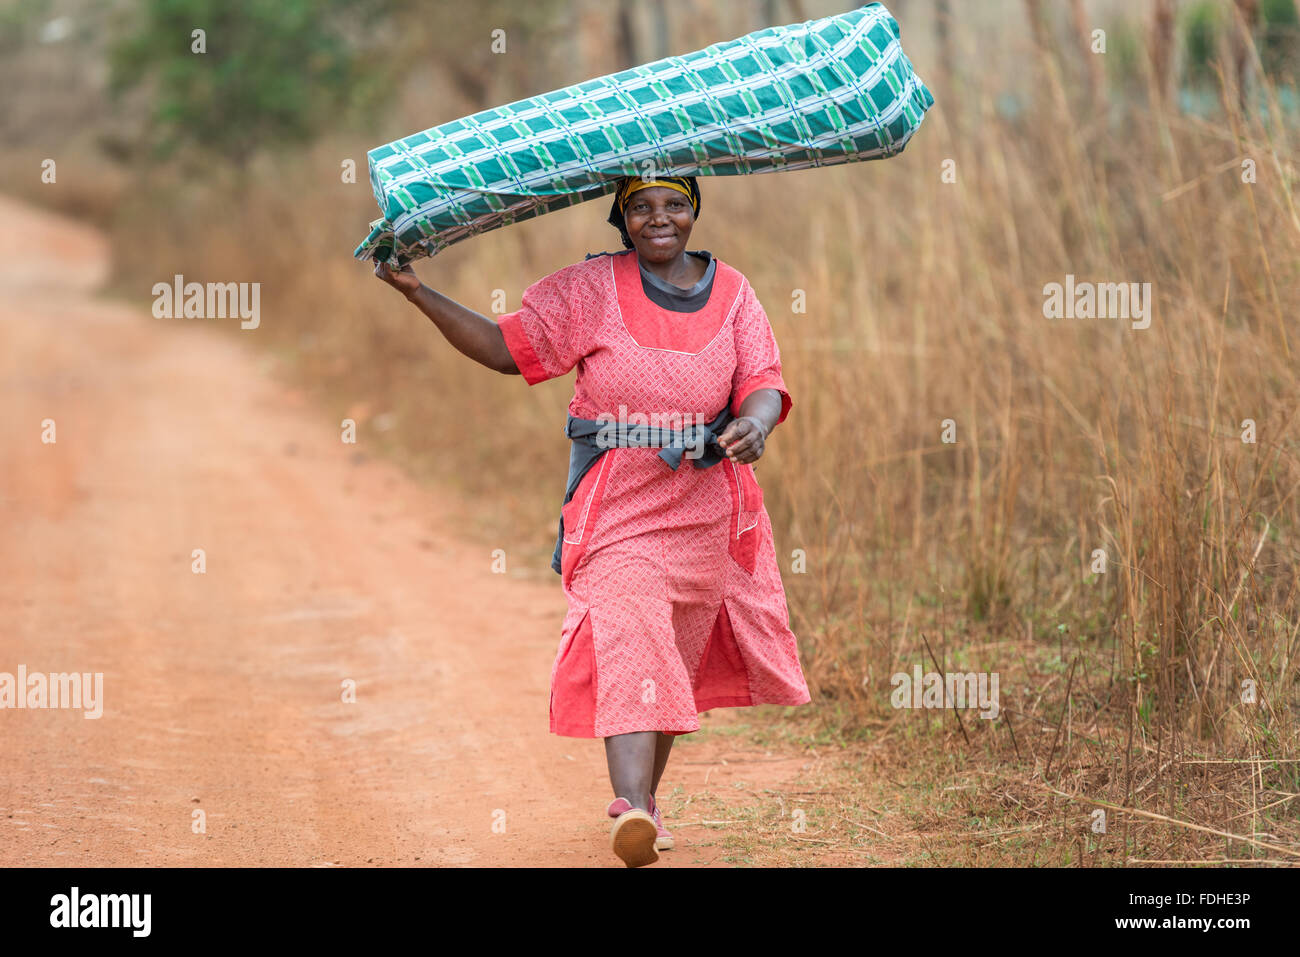 African woman carrying a bag on her head on a dirt road in the Hhohho region of Swaziland, Africa. Stock Photo